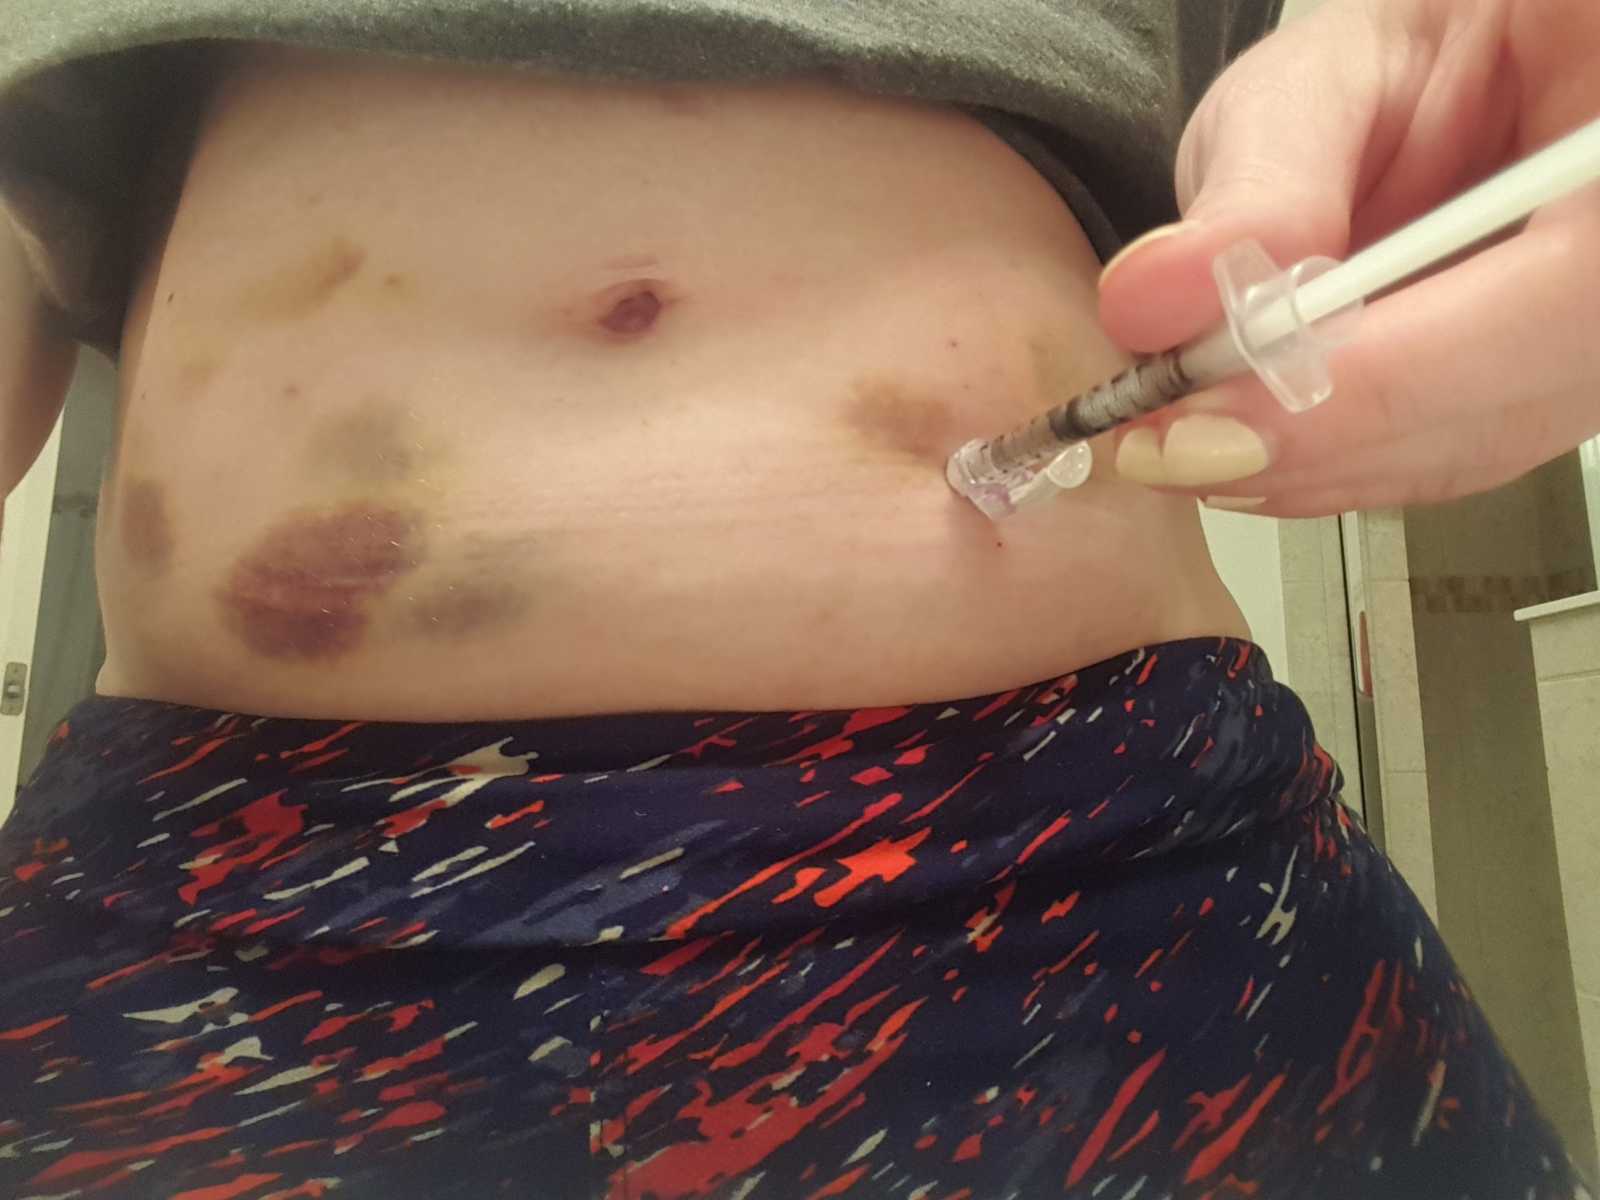 toddlers being injected with a needle on his stomach that is covered in bruises